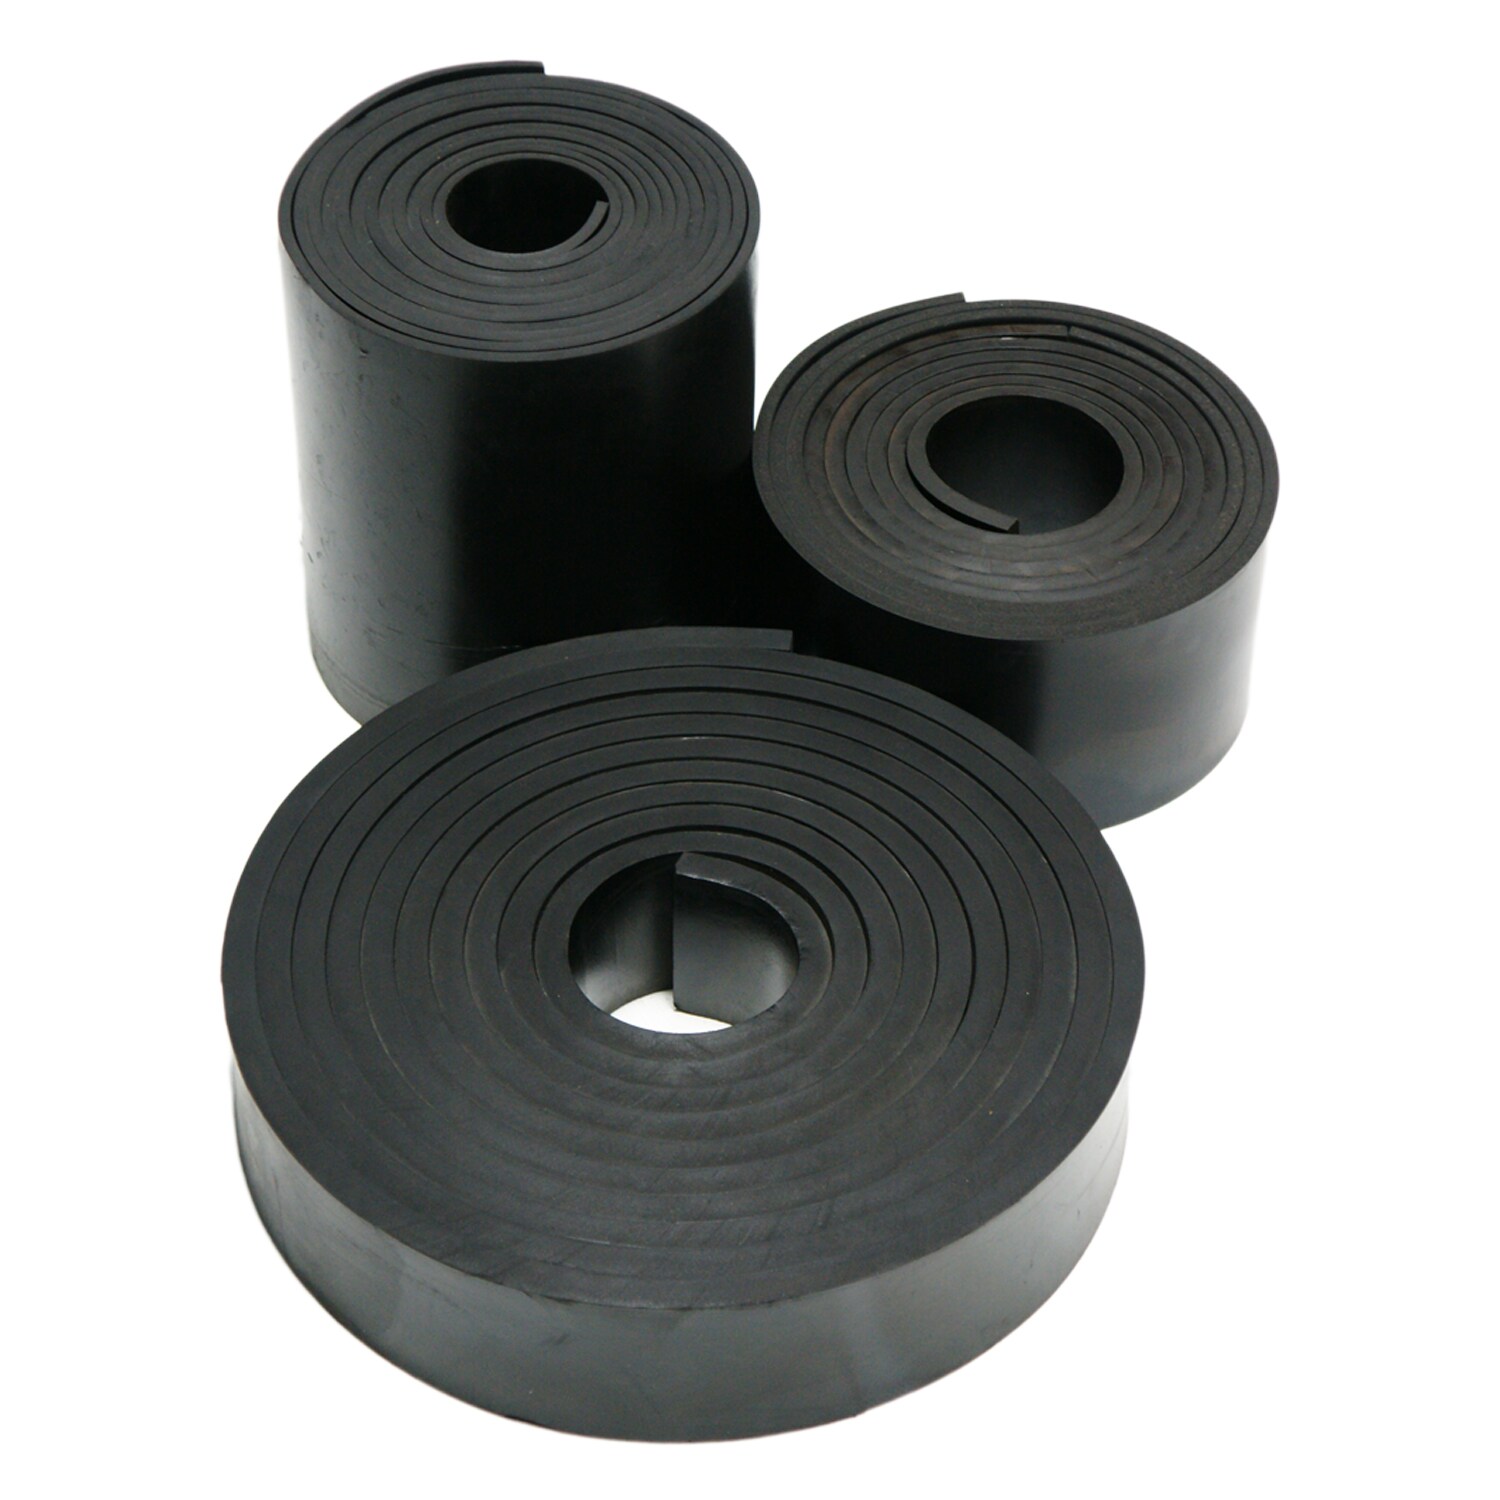 Rubber-Cal Neoprene 1/4-in T x 4-in W x 36-in L Black Commercial 60A Durometer Rubber Sheet | 30-S60-250-004-036